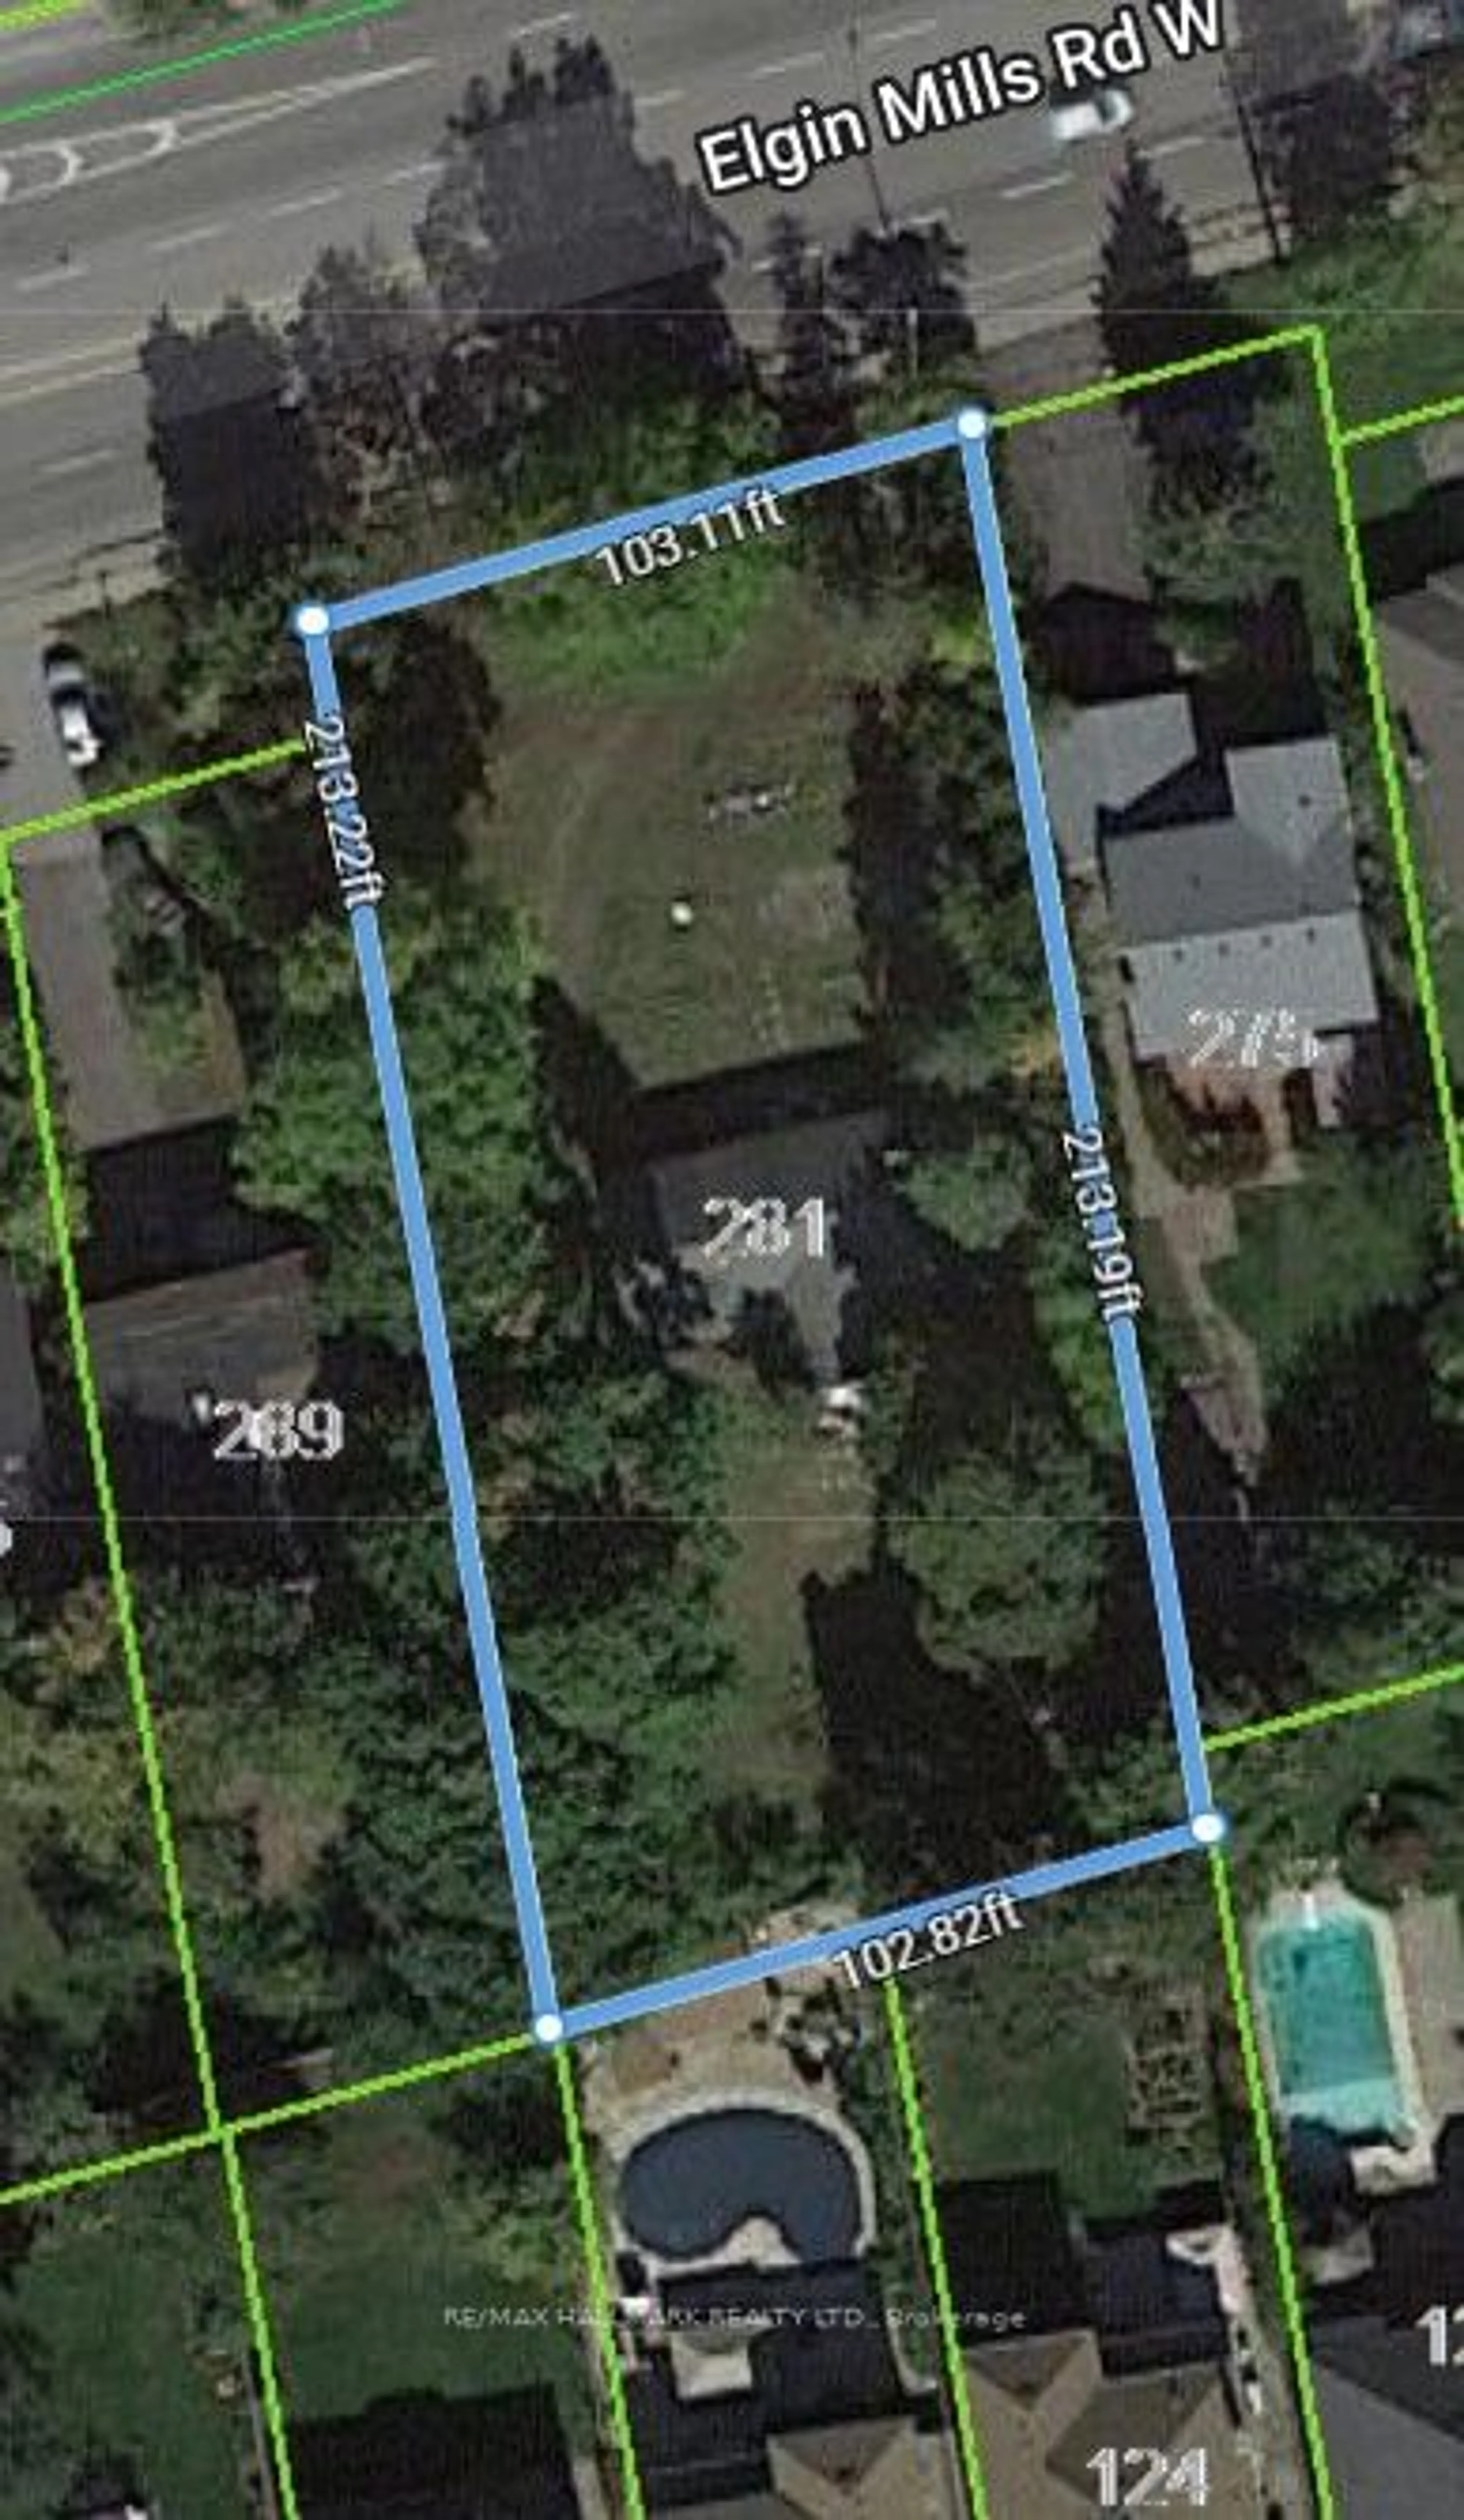 Frontside or backside of a home for 281 Elgin Mills Rd, Richmond Hill Ontario L4C 4M1